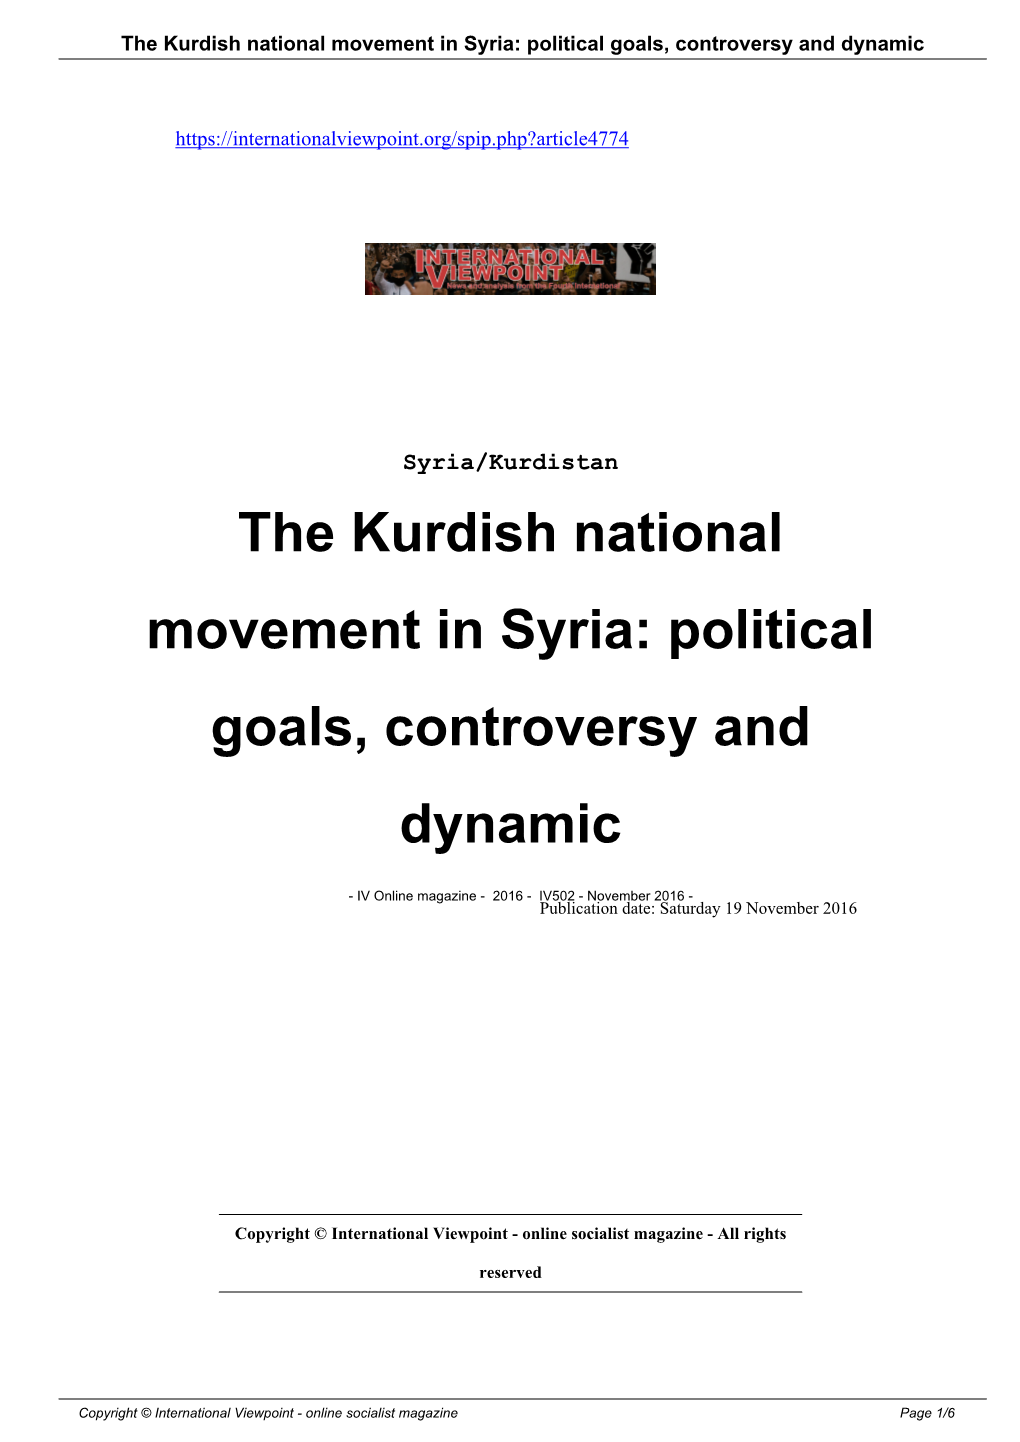 The Kurdish National Movement in Syria: Political Goals, Controversy and Dynamic